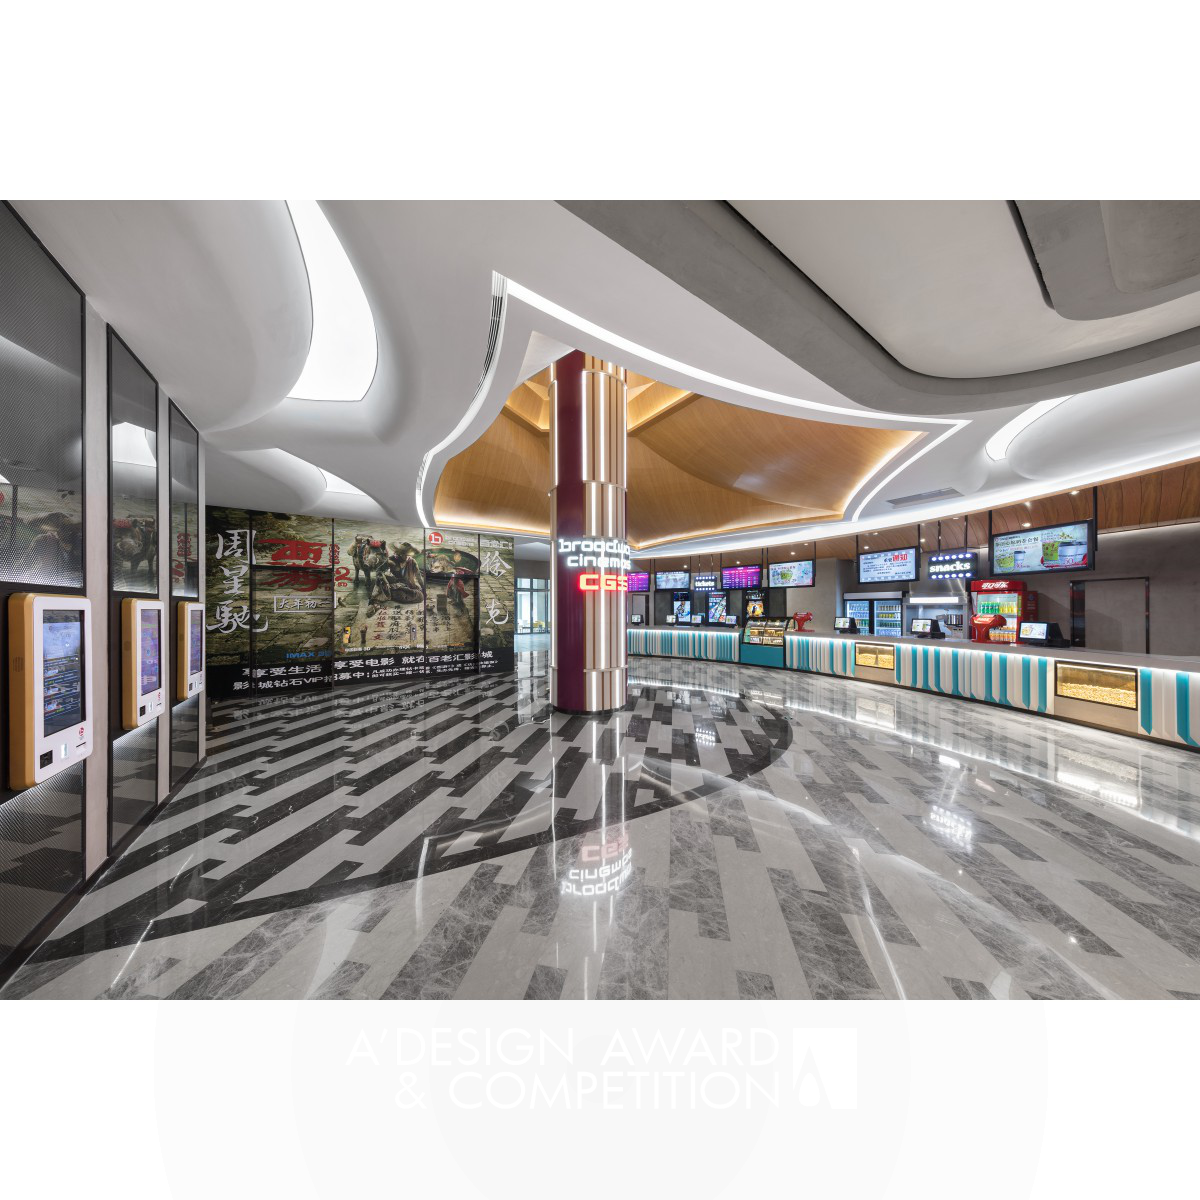 Circus in the town Cinema by Oft Interiors Ltd.